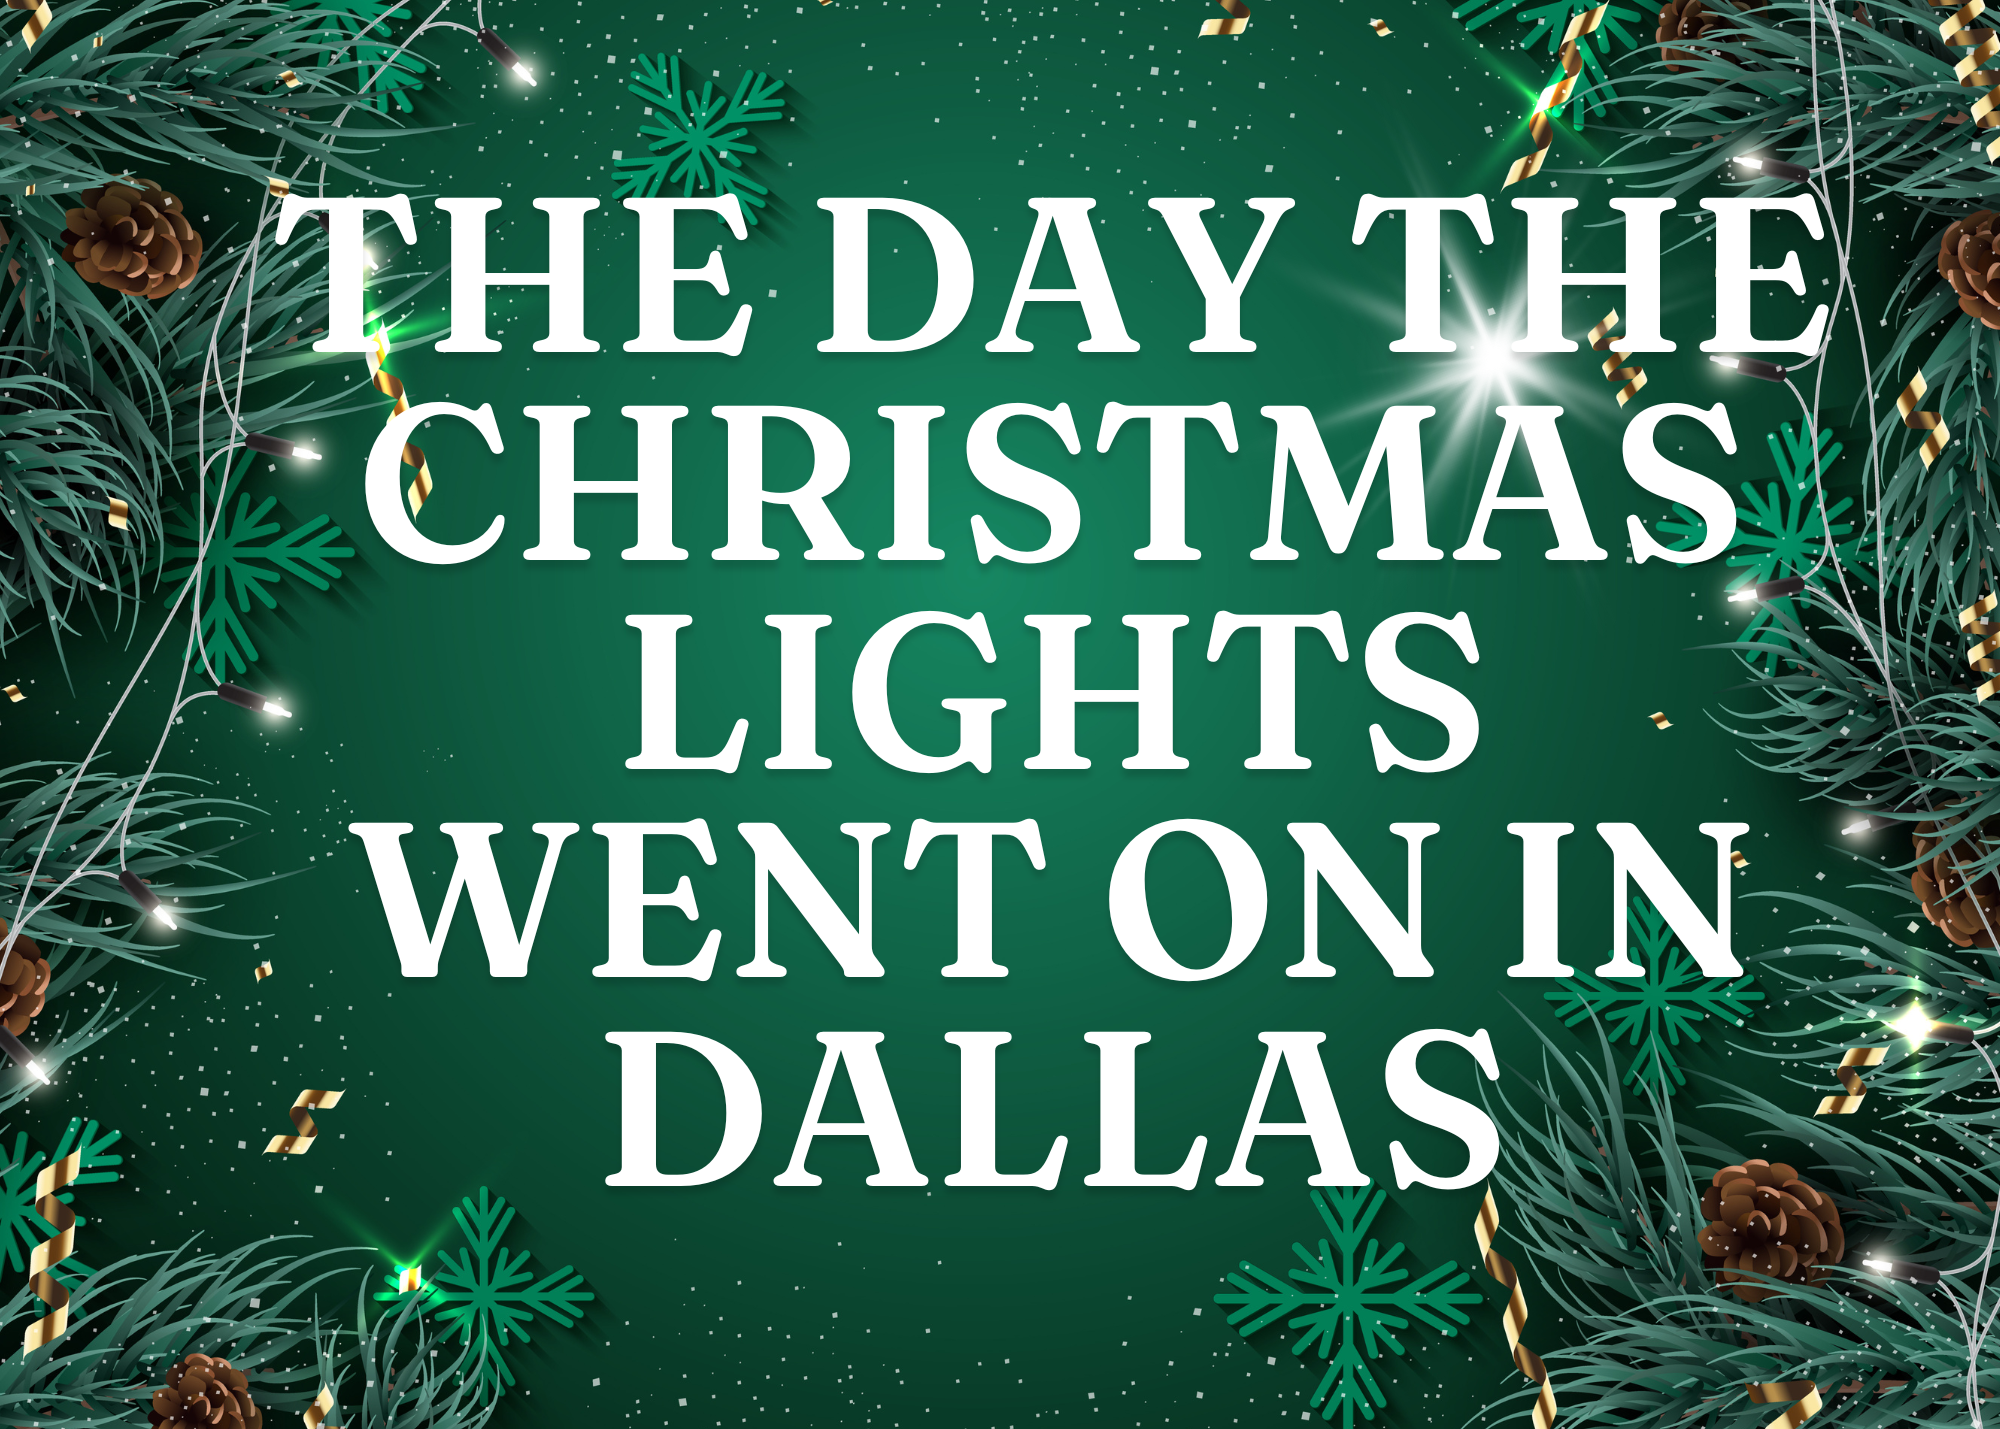 The Day the Christmas Lights Went On in Dallas